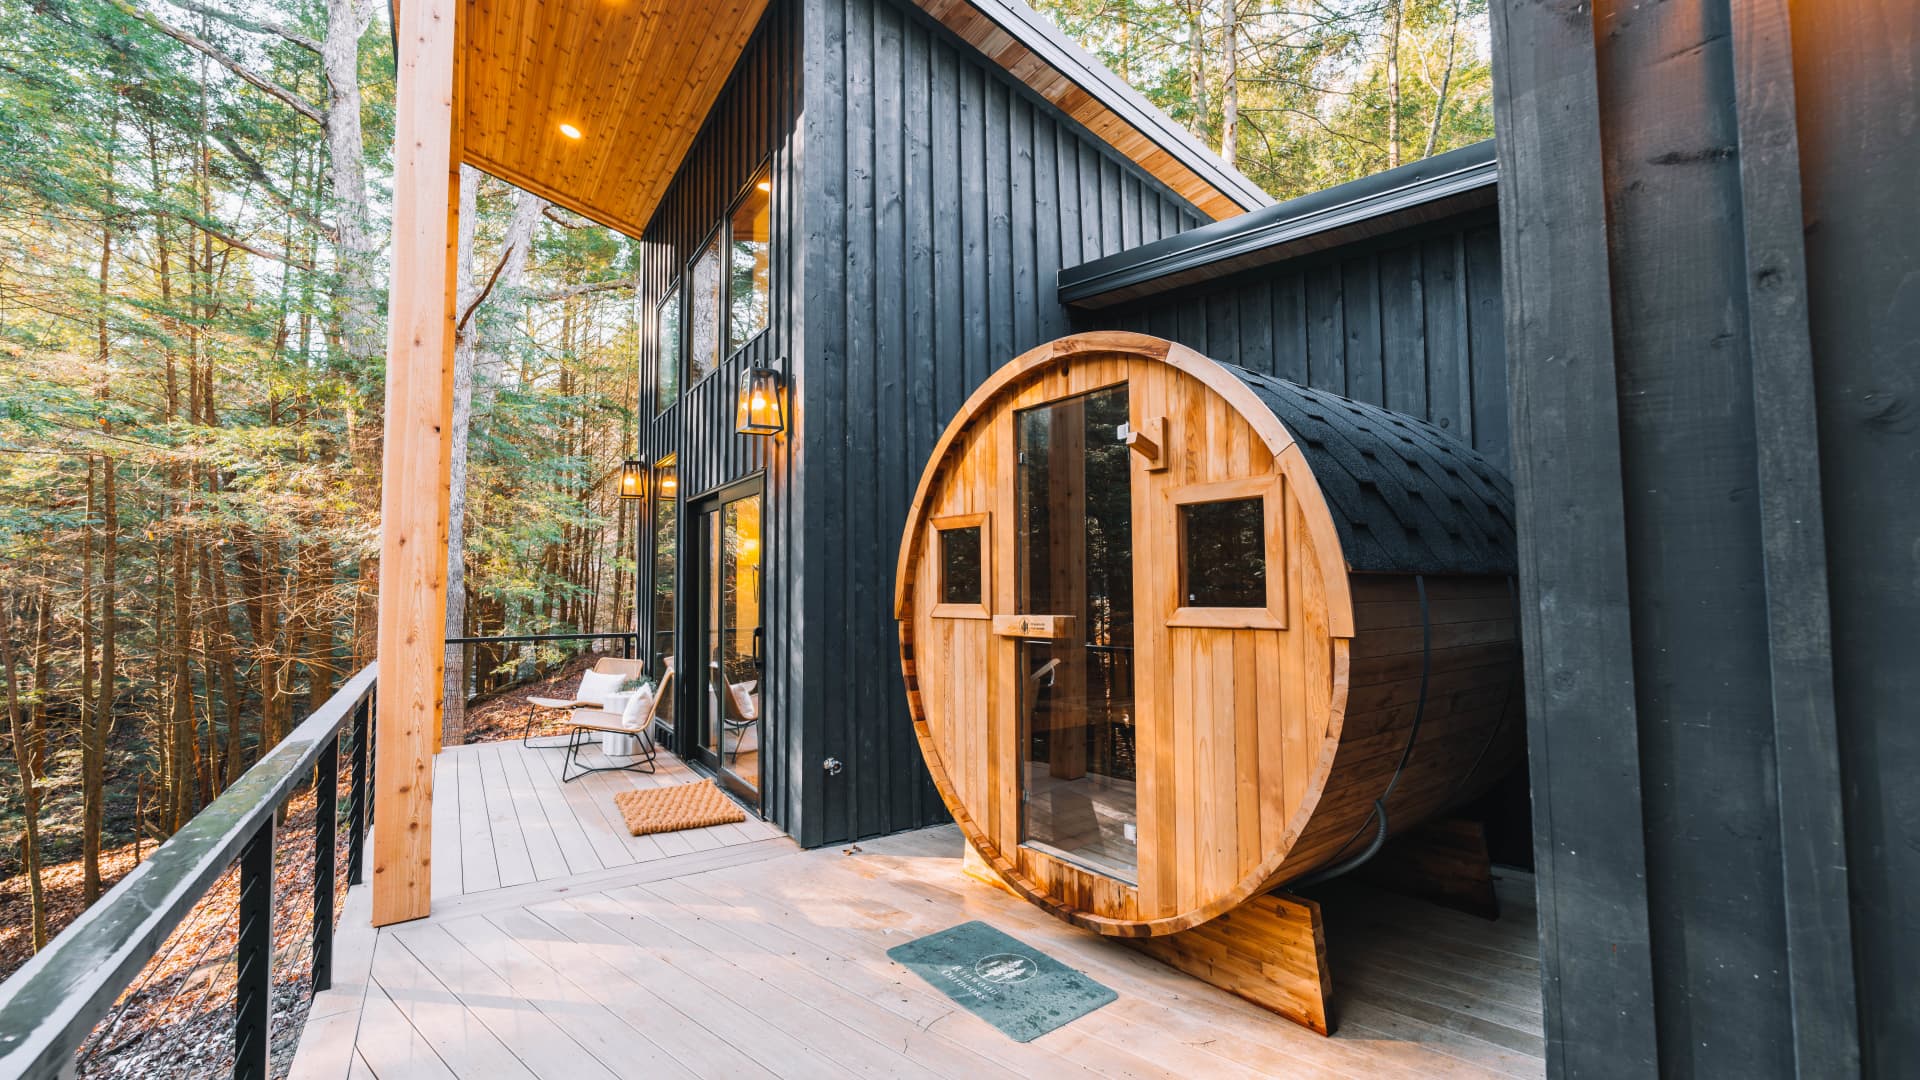 Ohio cabin named one of the top 10 global vacation rentals [Video]